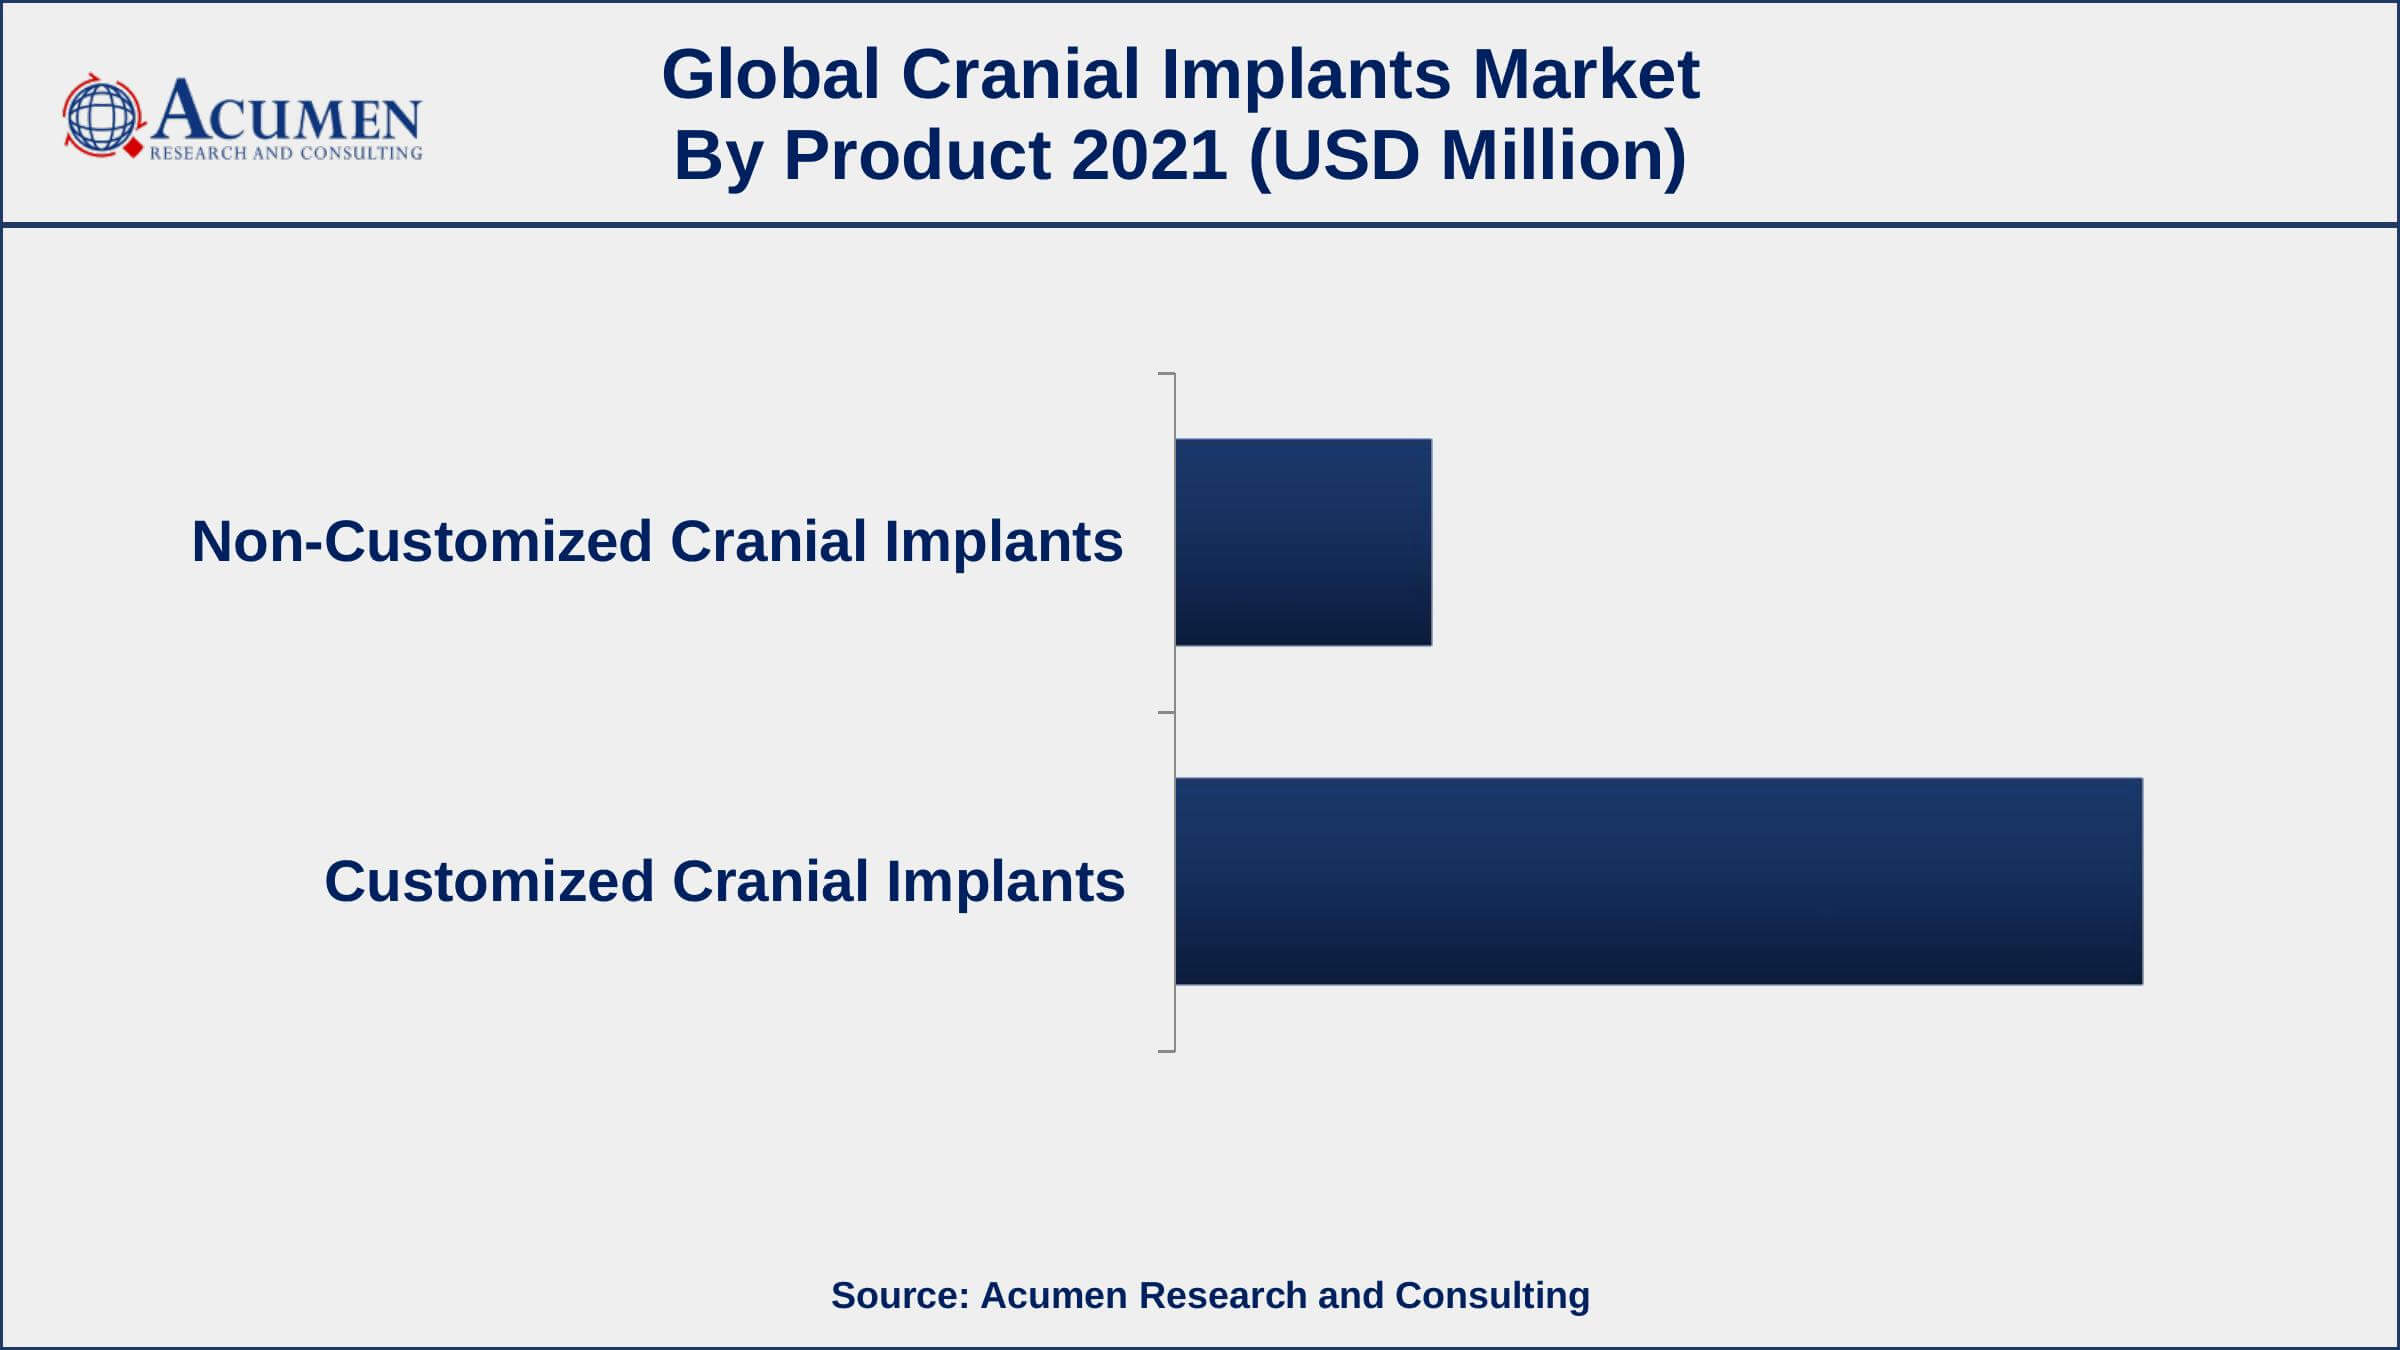 By product, the customized cranial implants segment has accounted market share of over 78.9% in 2021